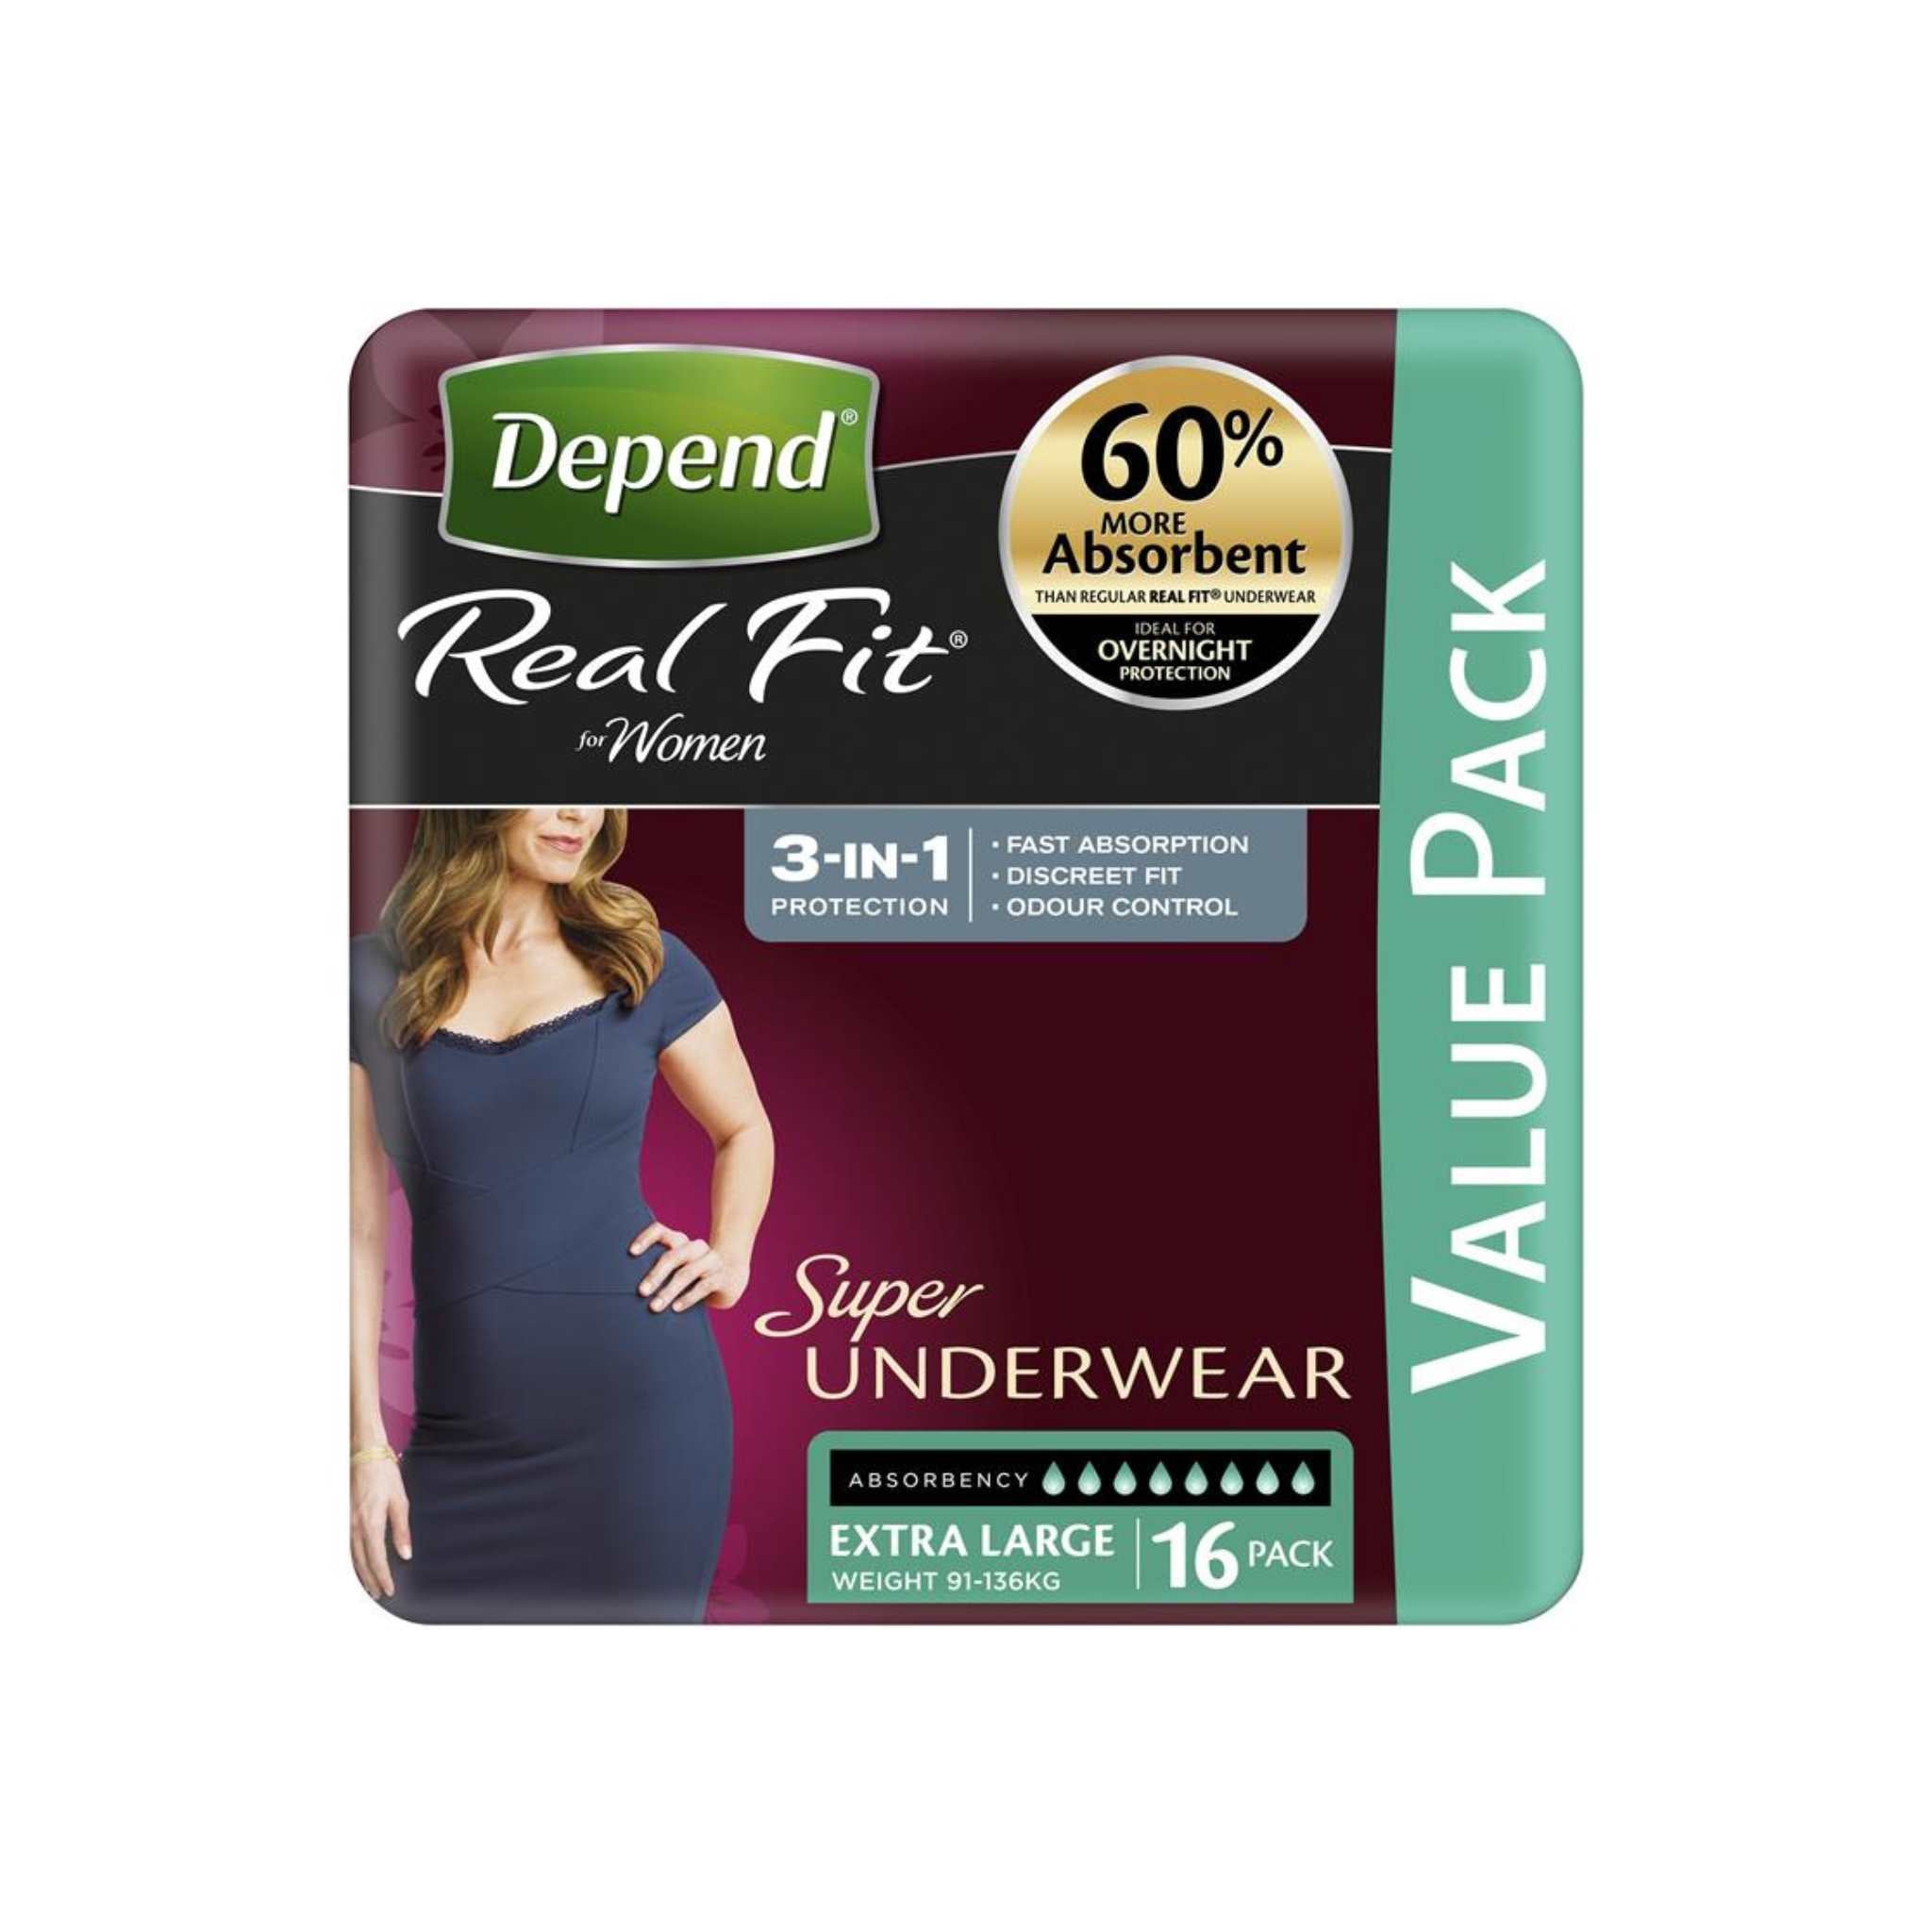 Buy Depend Underwear Realfit Night Defence Male Large 8 Pack